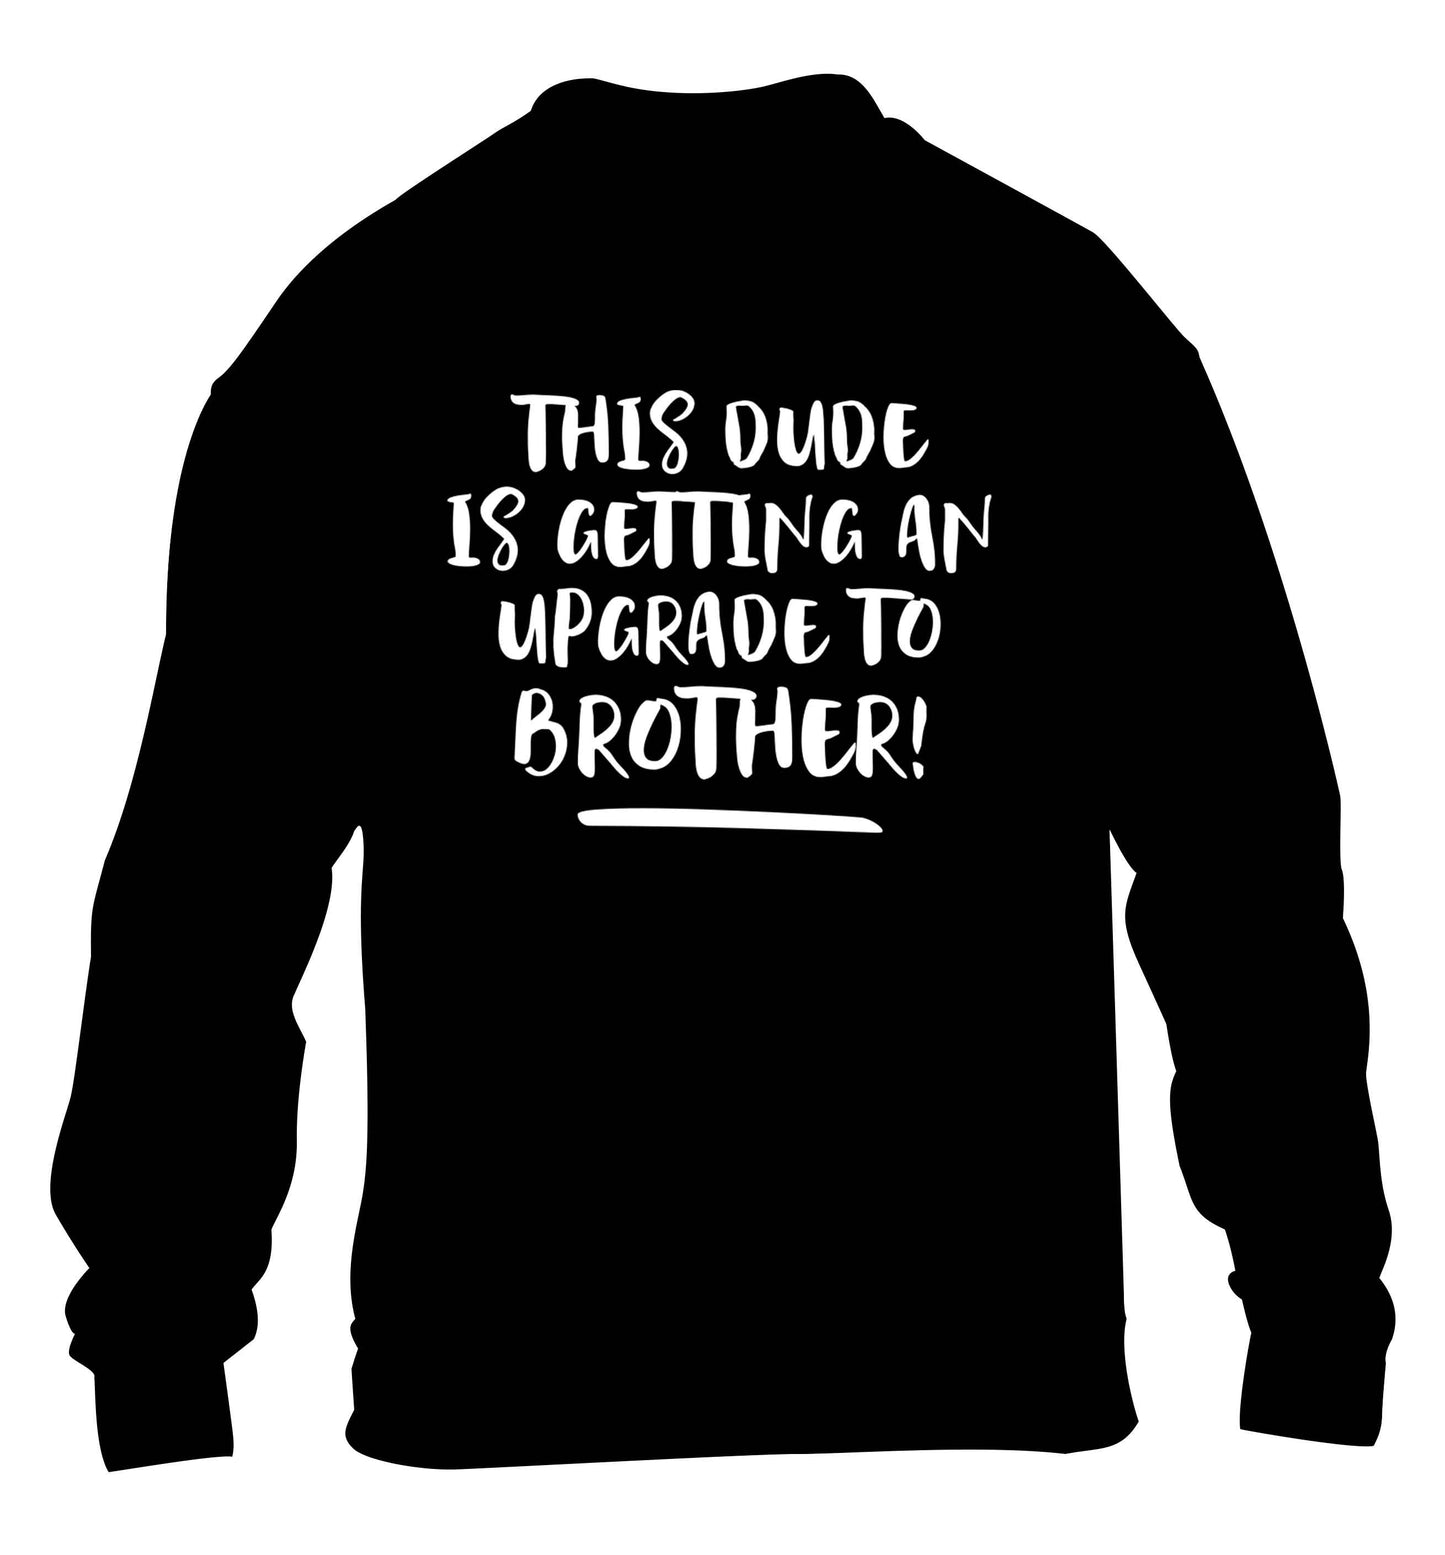 This dude is getting an upgrade to brother! children's black sweater 12-13 Years